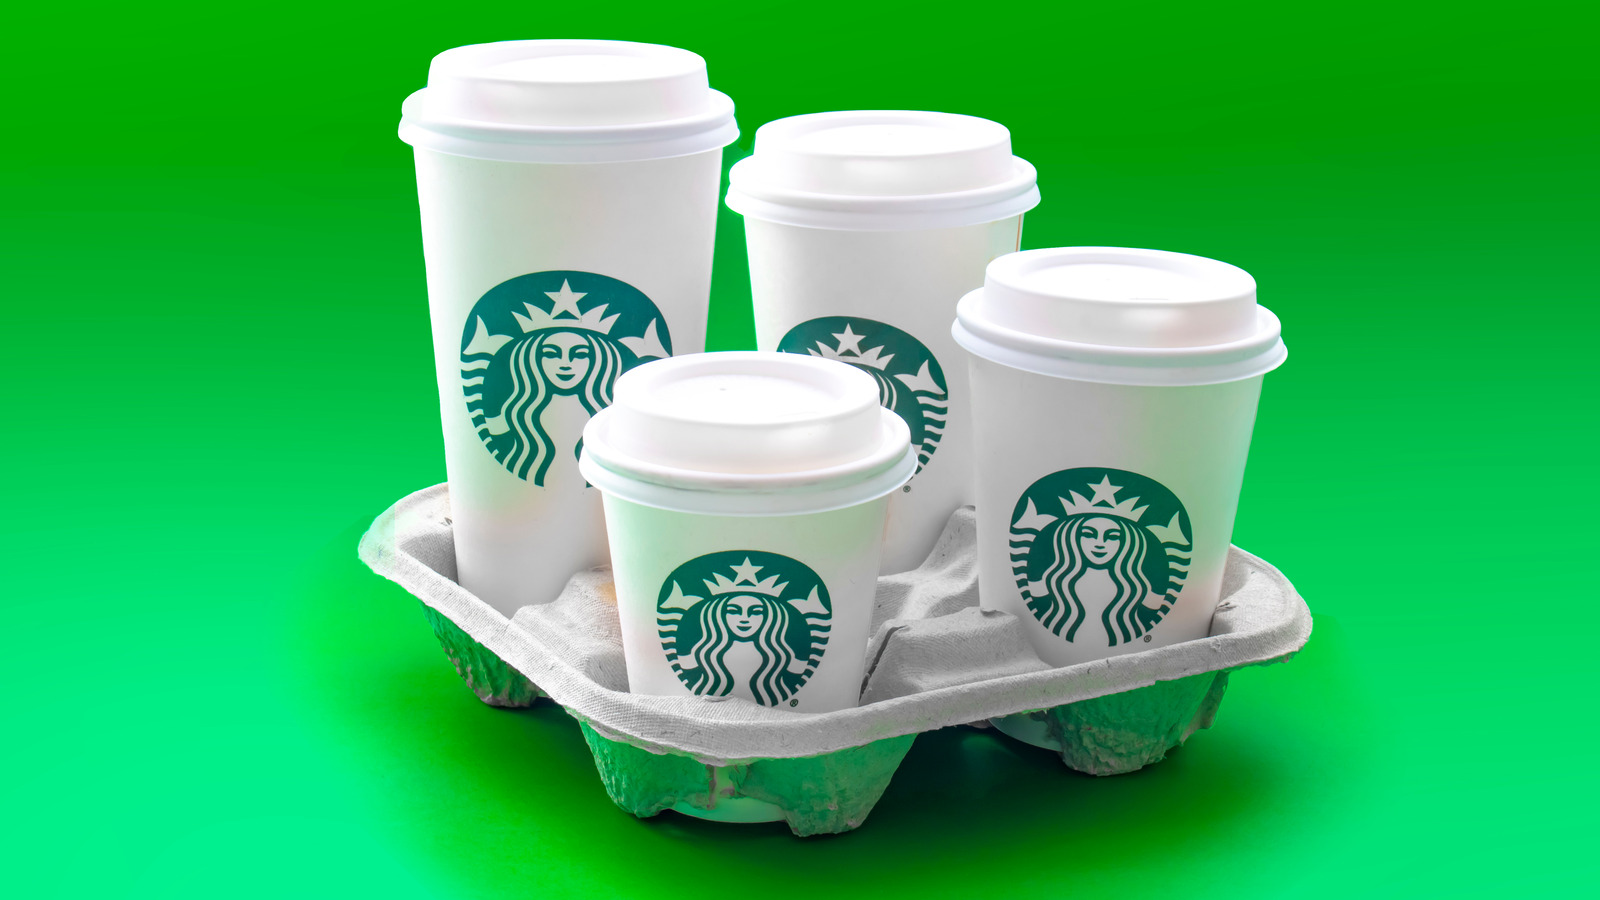 https://www.mashed.com/img/gallery/starbucks-festive-menu-is-back-and-so-are-its-holiday-cups/l-intro-1667404234.jpg